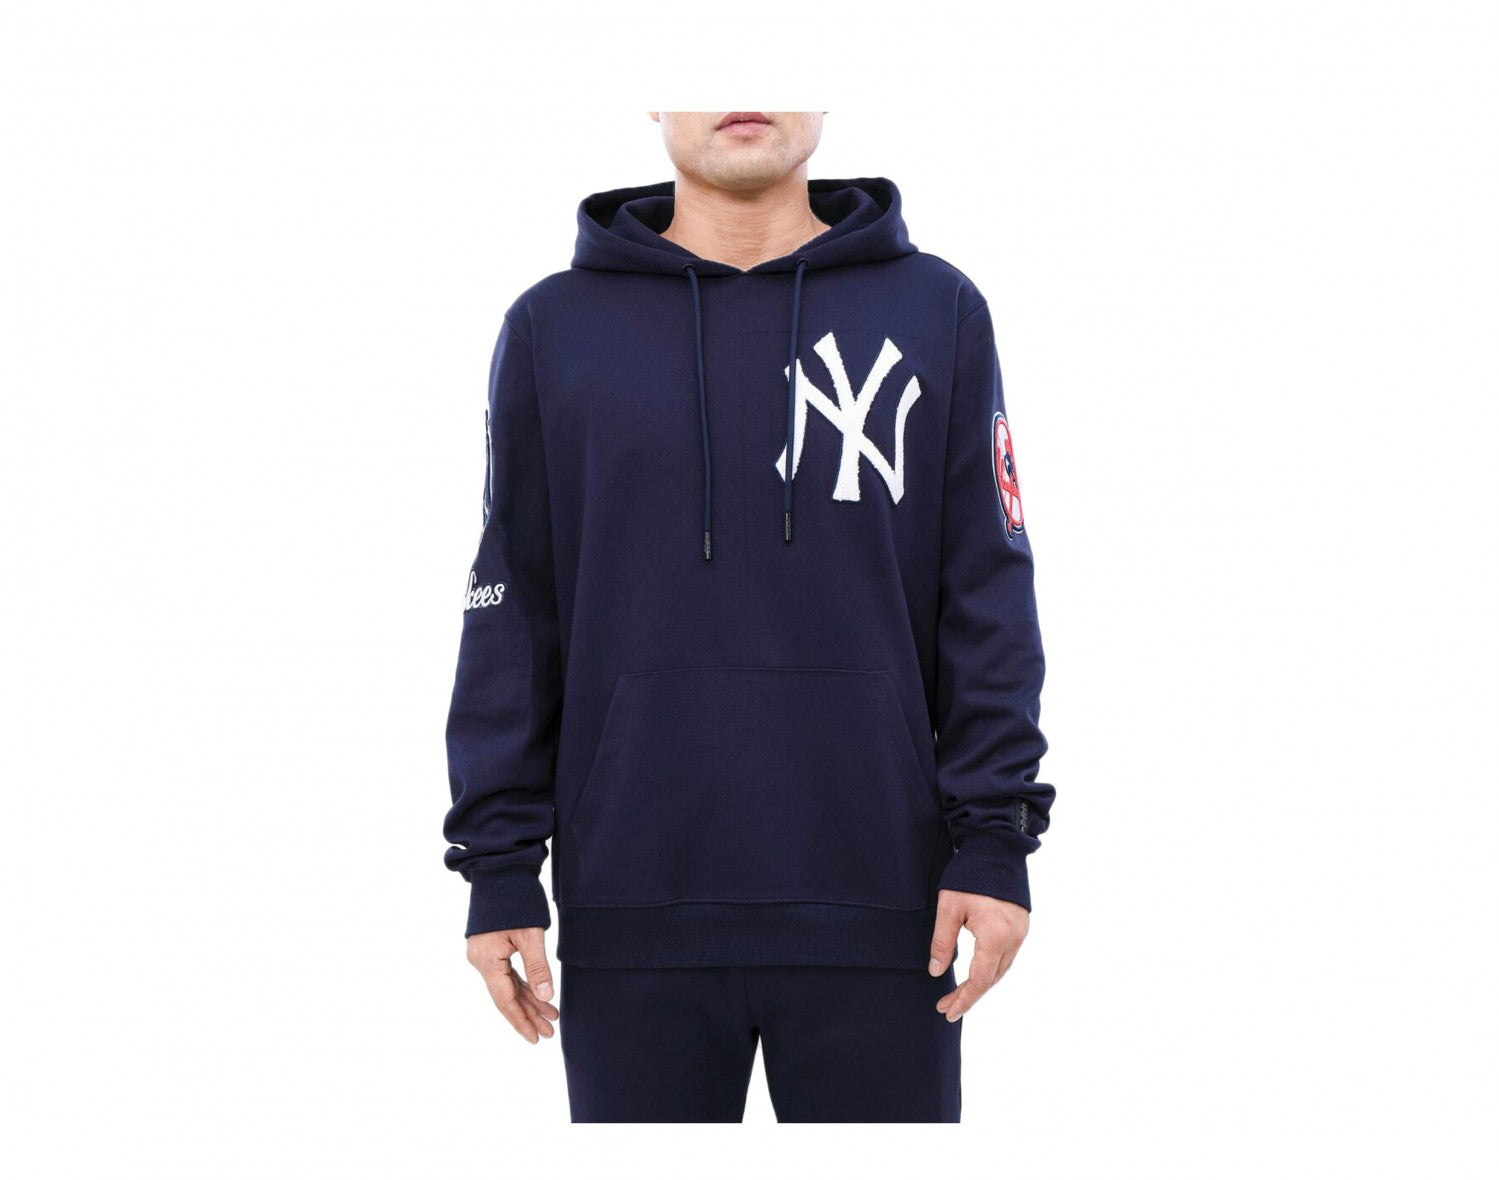 Men's New York Yankees MLB History Champions Hoodie in Navy blue/navy Size XL | Cotton/Polyester/Fleece by New Era